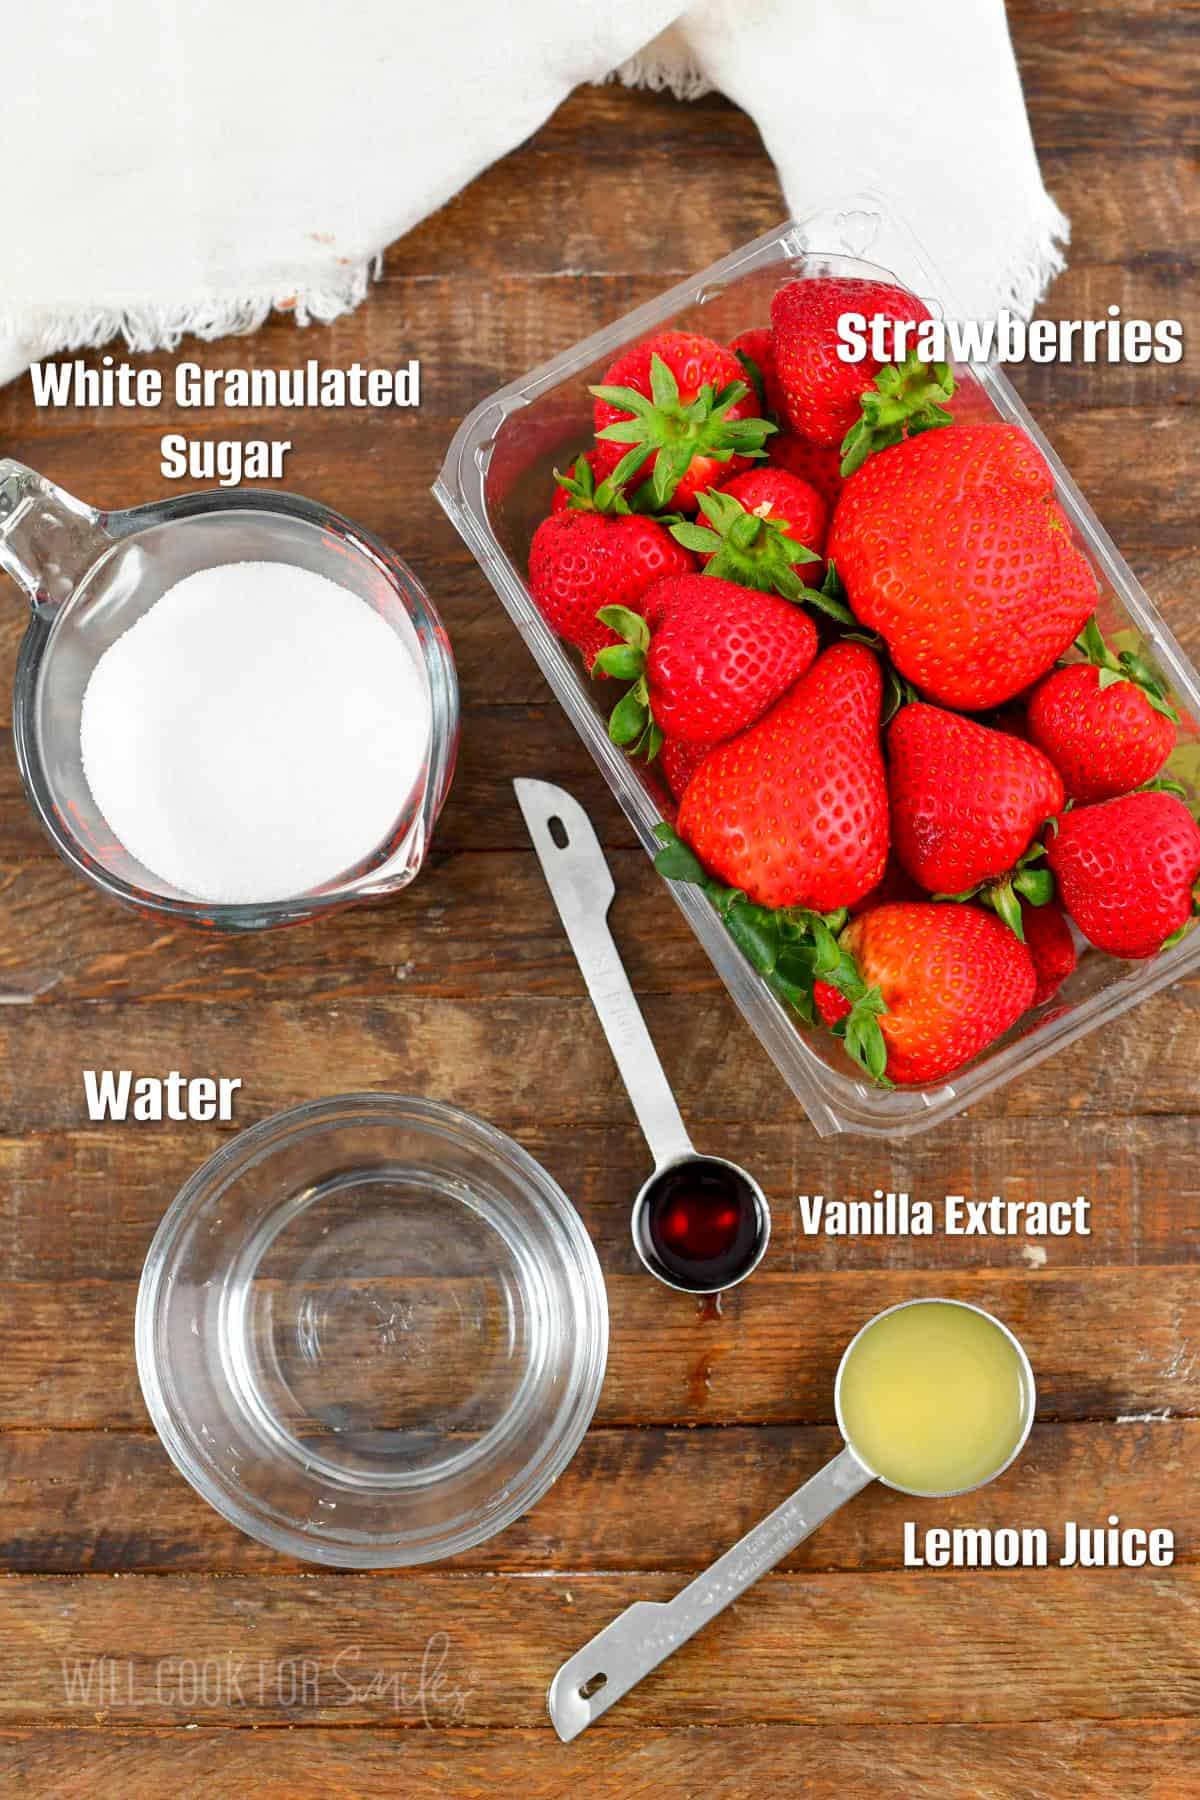 labeled ingredients for strawberry topping on a wooden board.